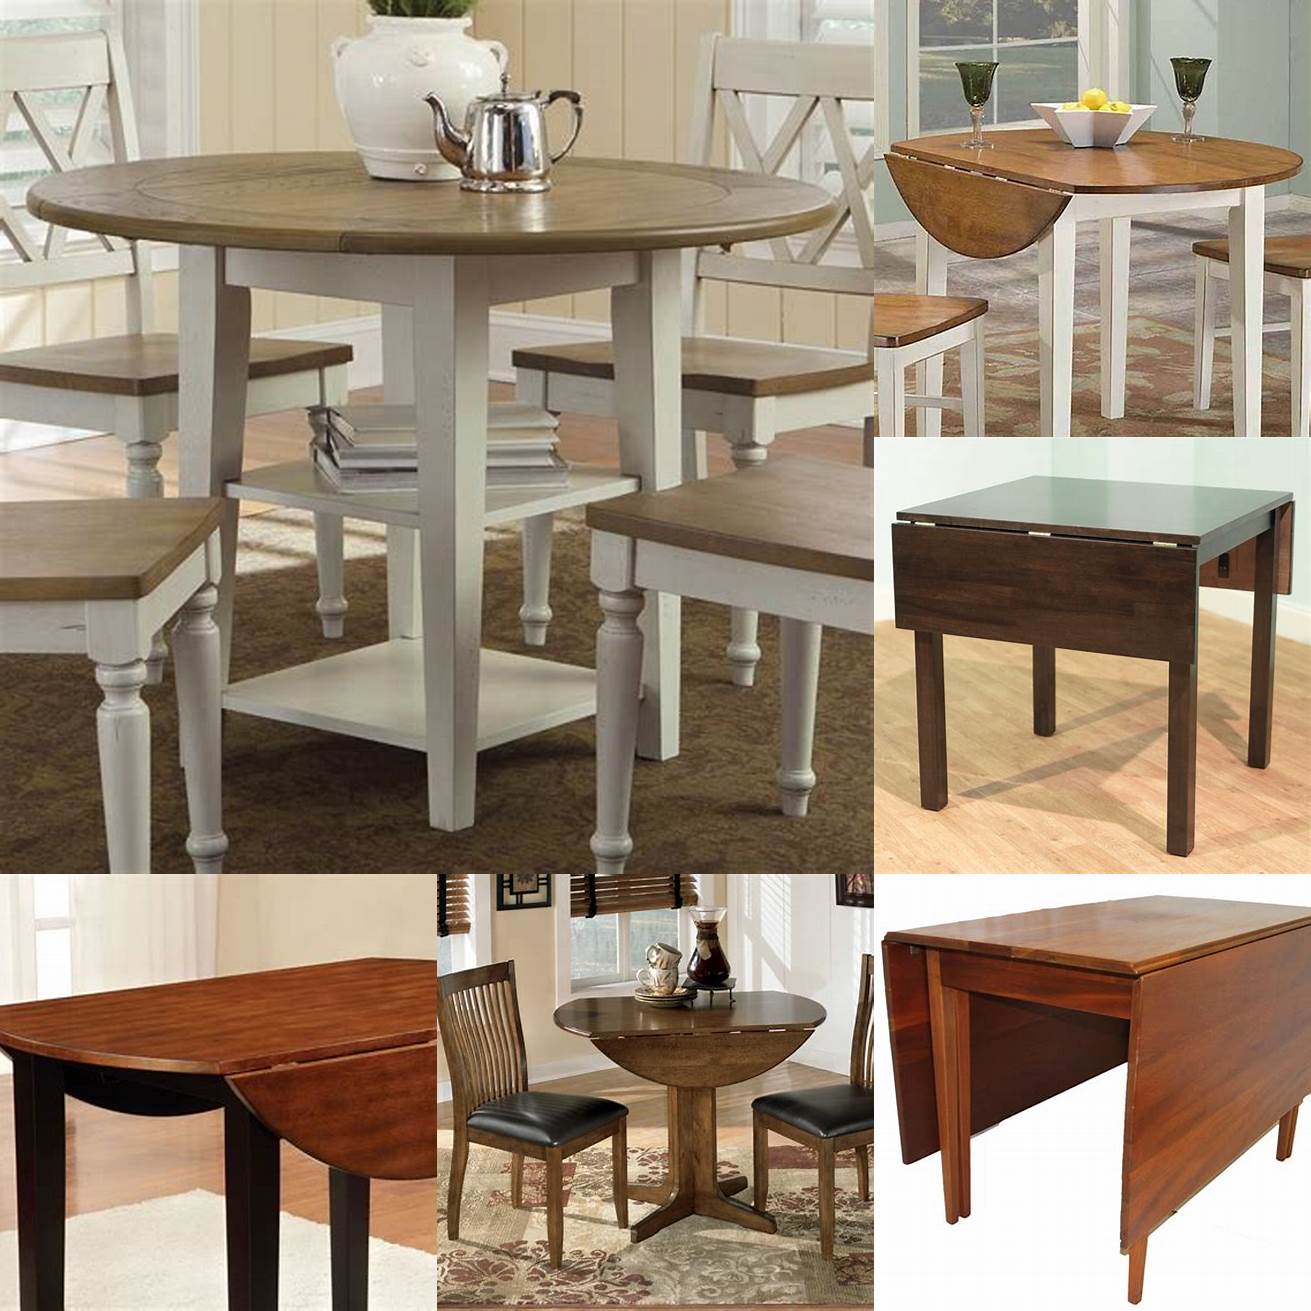 A drop-leaf table is a great option for those who need a dining table but dont have the space for a full-sized one